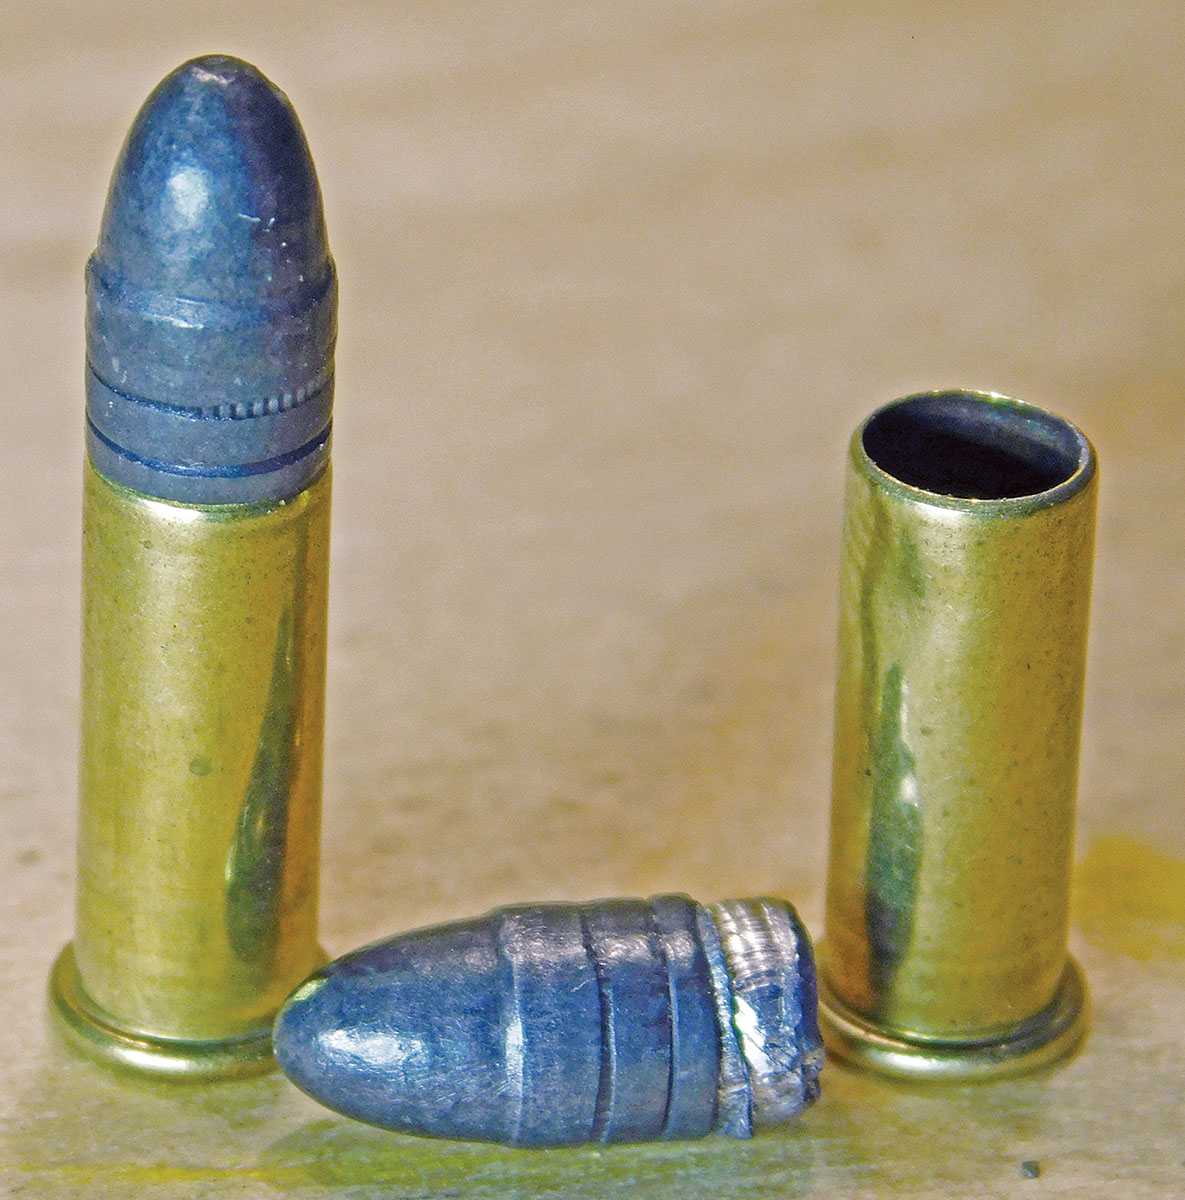 With a bullet that matches the external diameter of the cartridge and clearly evident heel, the 22 Long Rifle is the last commonly used cartridge of its type.